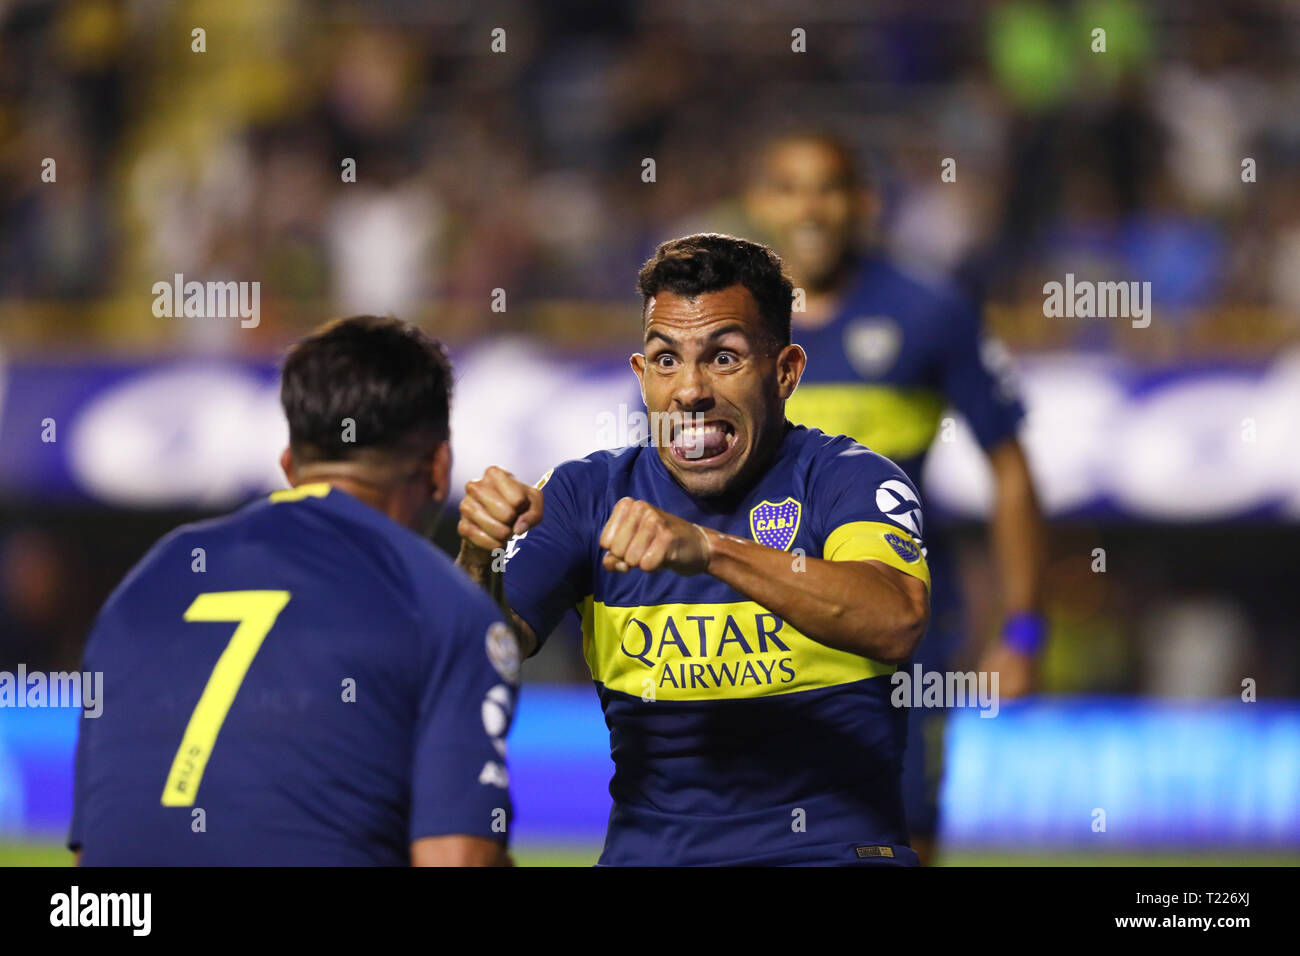 Buenos Aires, Argentina - March 30, 2019: Carlos Tevez celebrating with Cristian Pavon in the Bombonera Stadium in Buenos Aires, Argentina Stock Photo